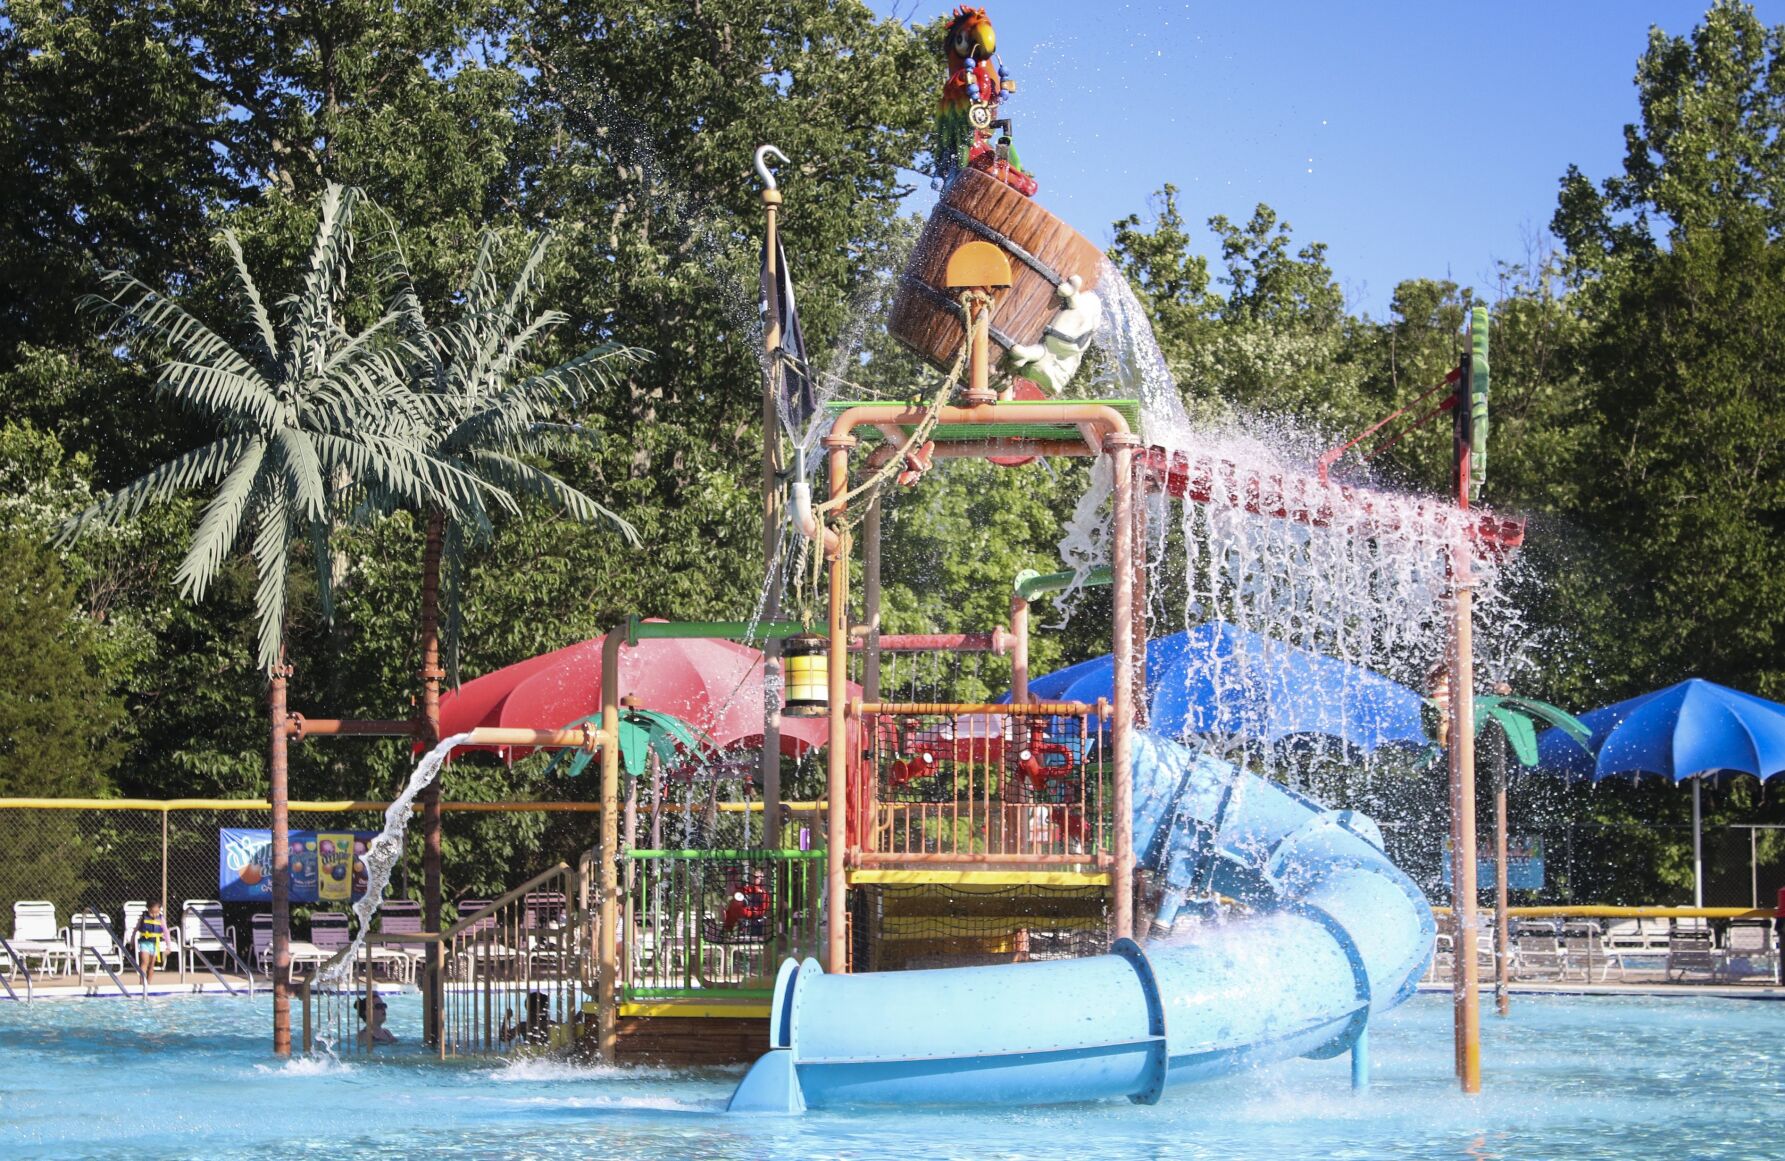 Cool off in Fairfax Countys local water parks this summer Fairfax County fairfaxtimes